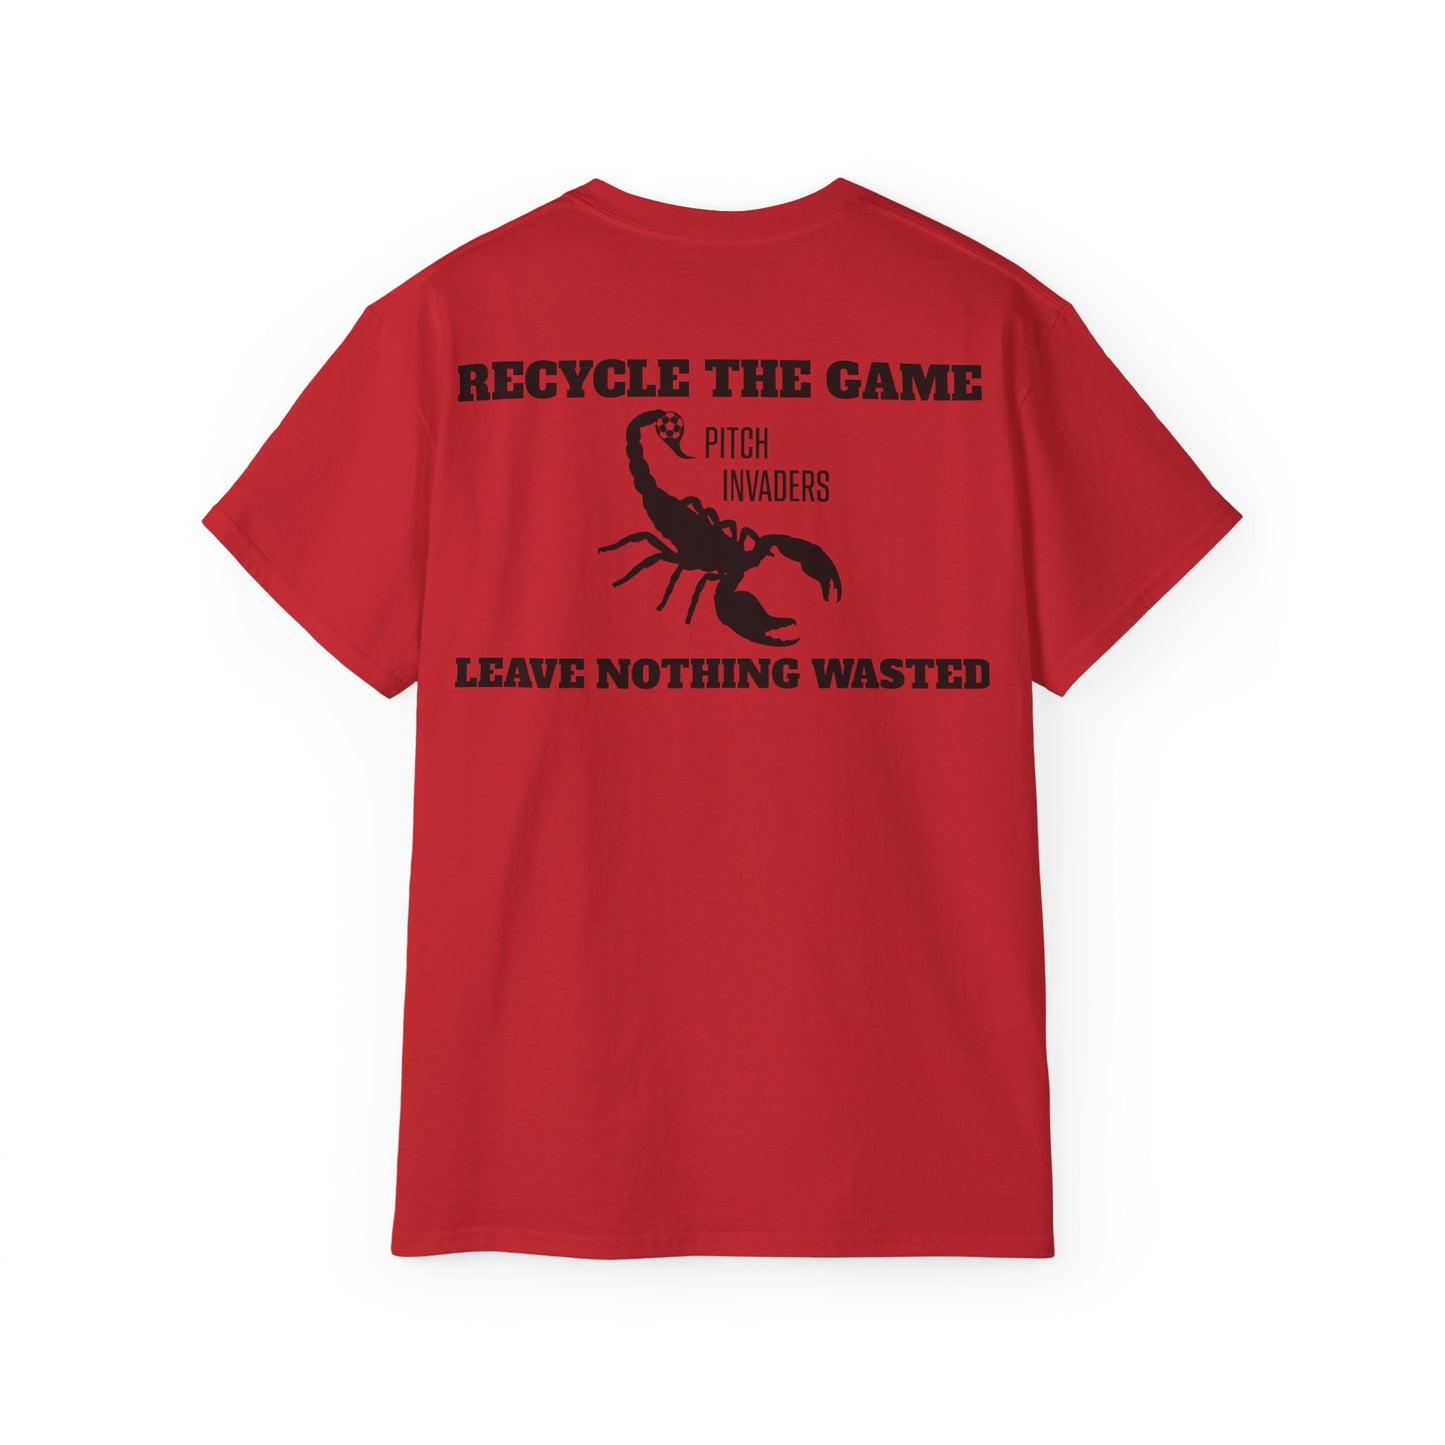 RECYCLE THE GAME LEAVE NOTHING WASTED Casual T-Shirt (Unisex)